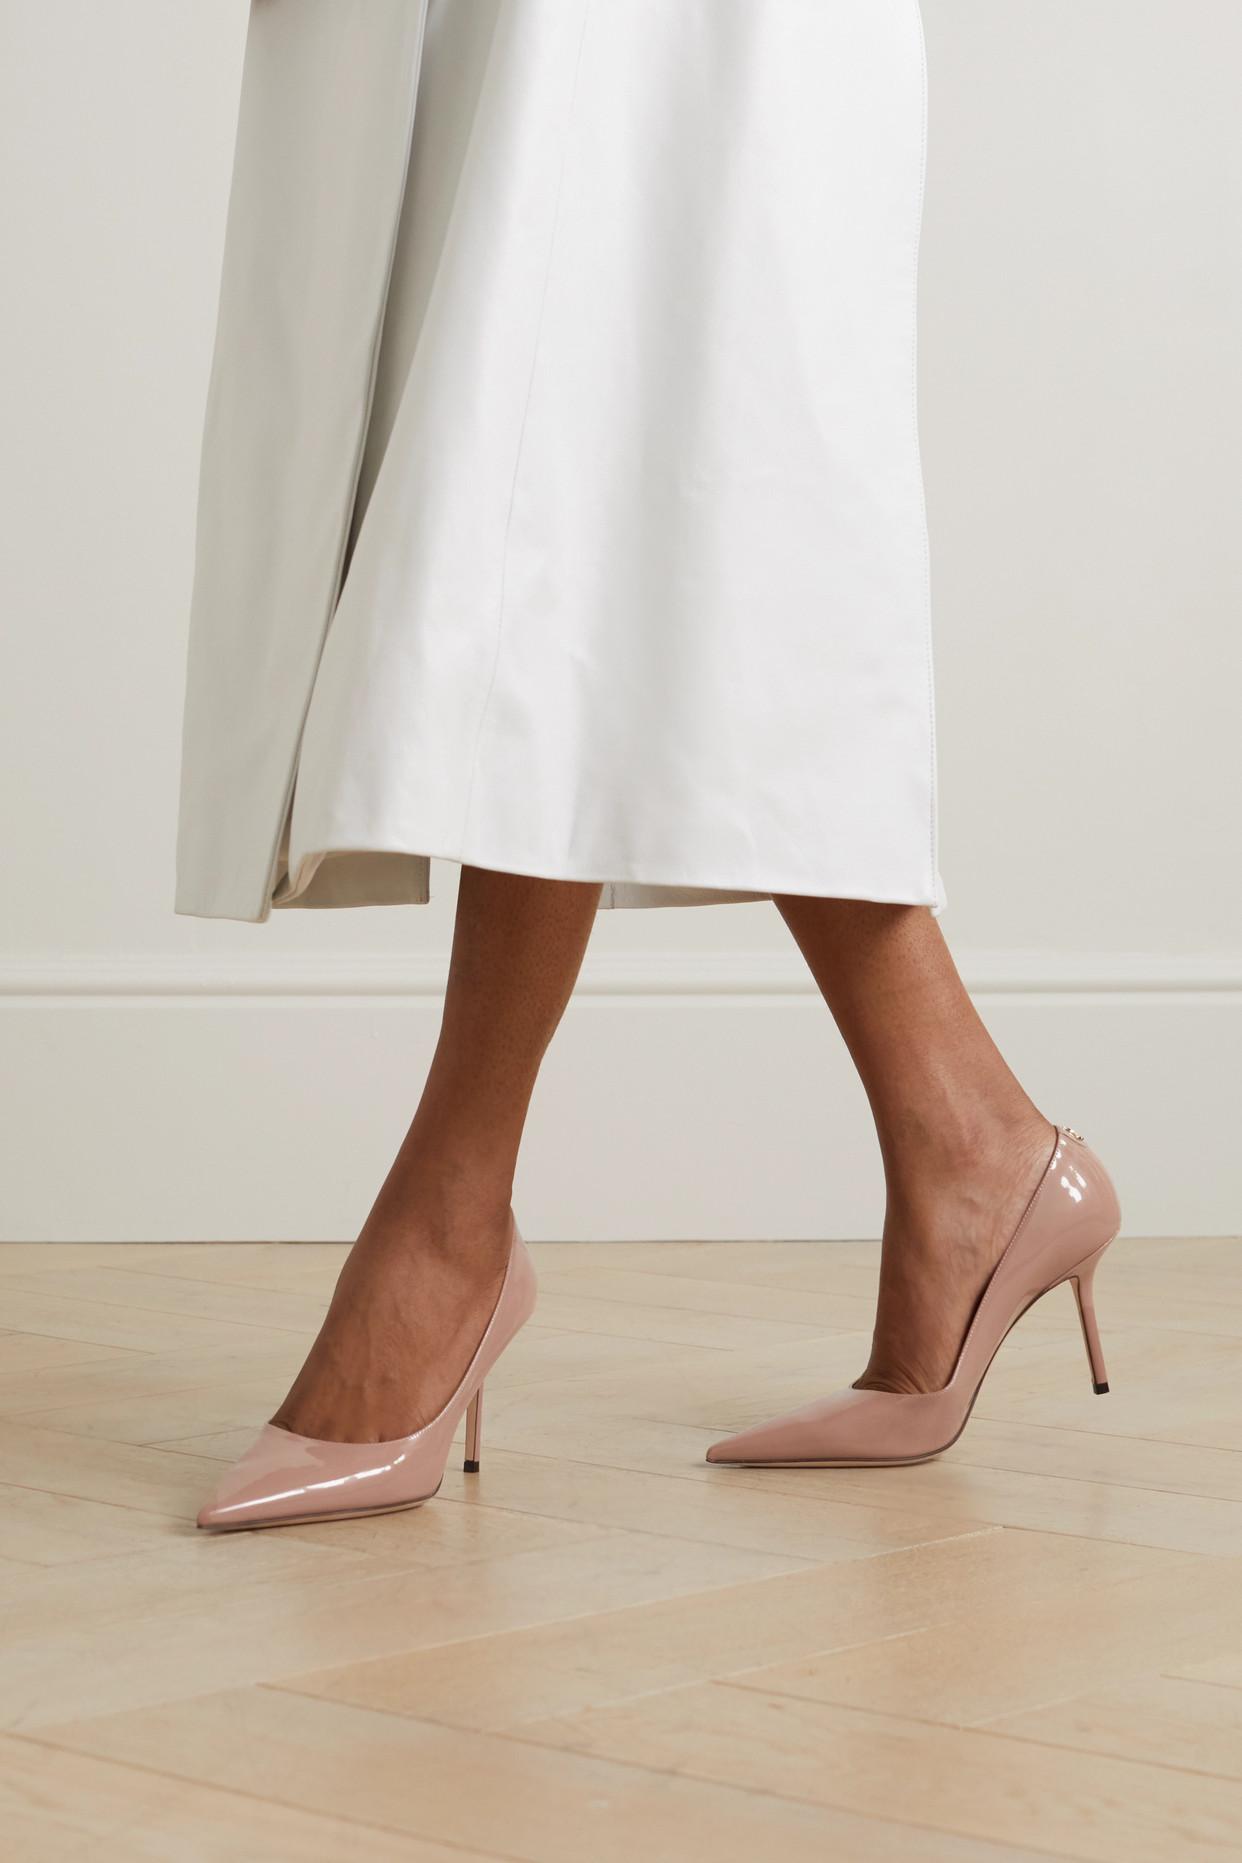 Jimmy Choo Love 85 Patent-leather Pumps | Lyst